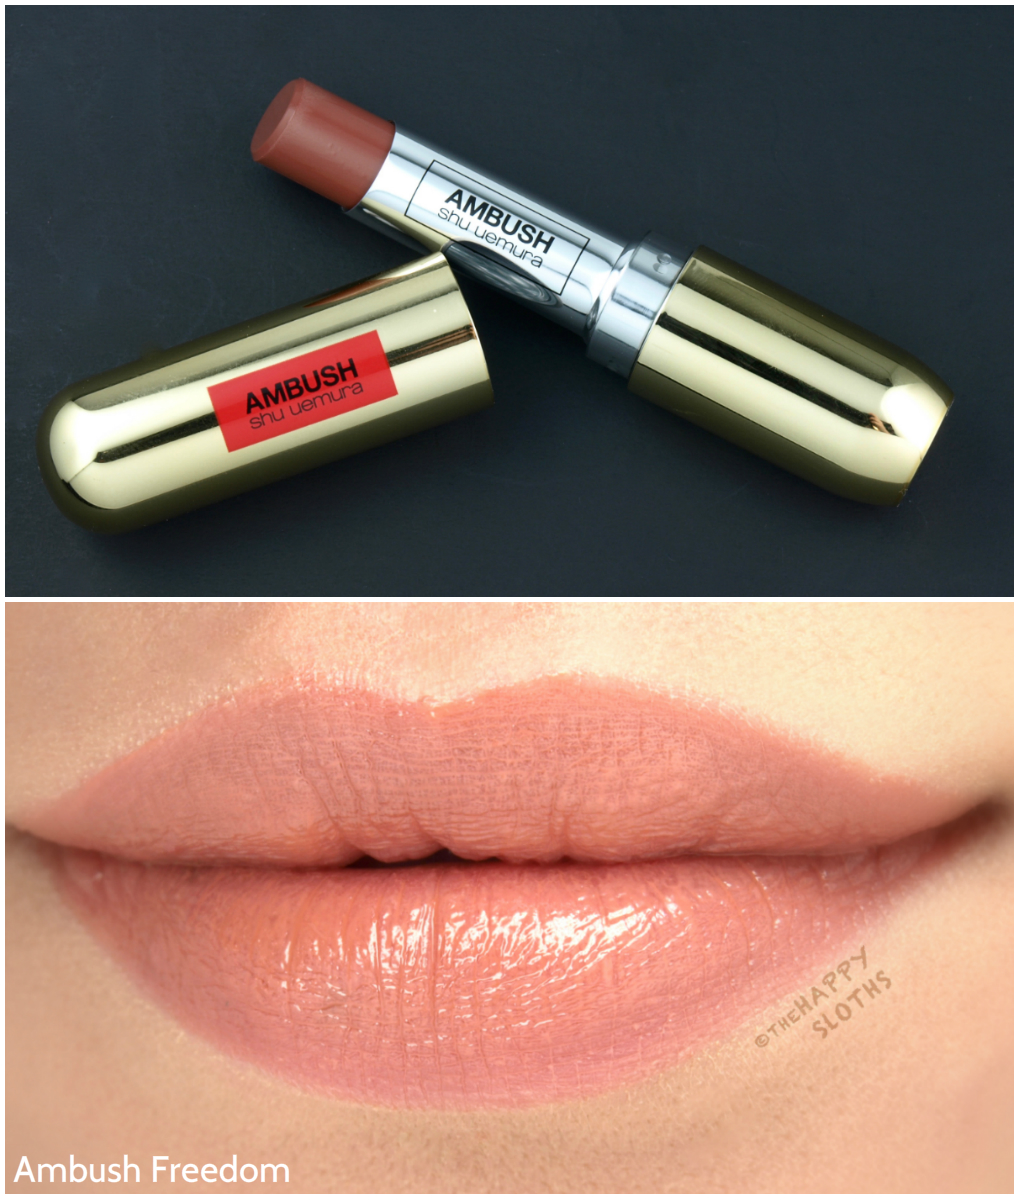 Shu Uemura x AMBUSH Collection | Rouge Unlimited Sheer Shine Lipstick in "Ambush Freedom": Review and Swatches